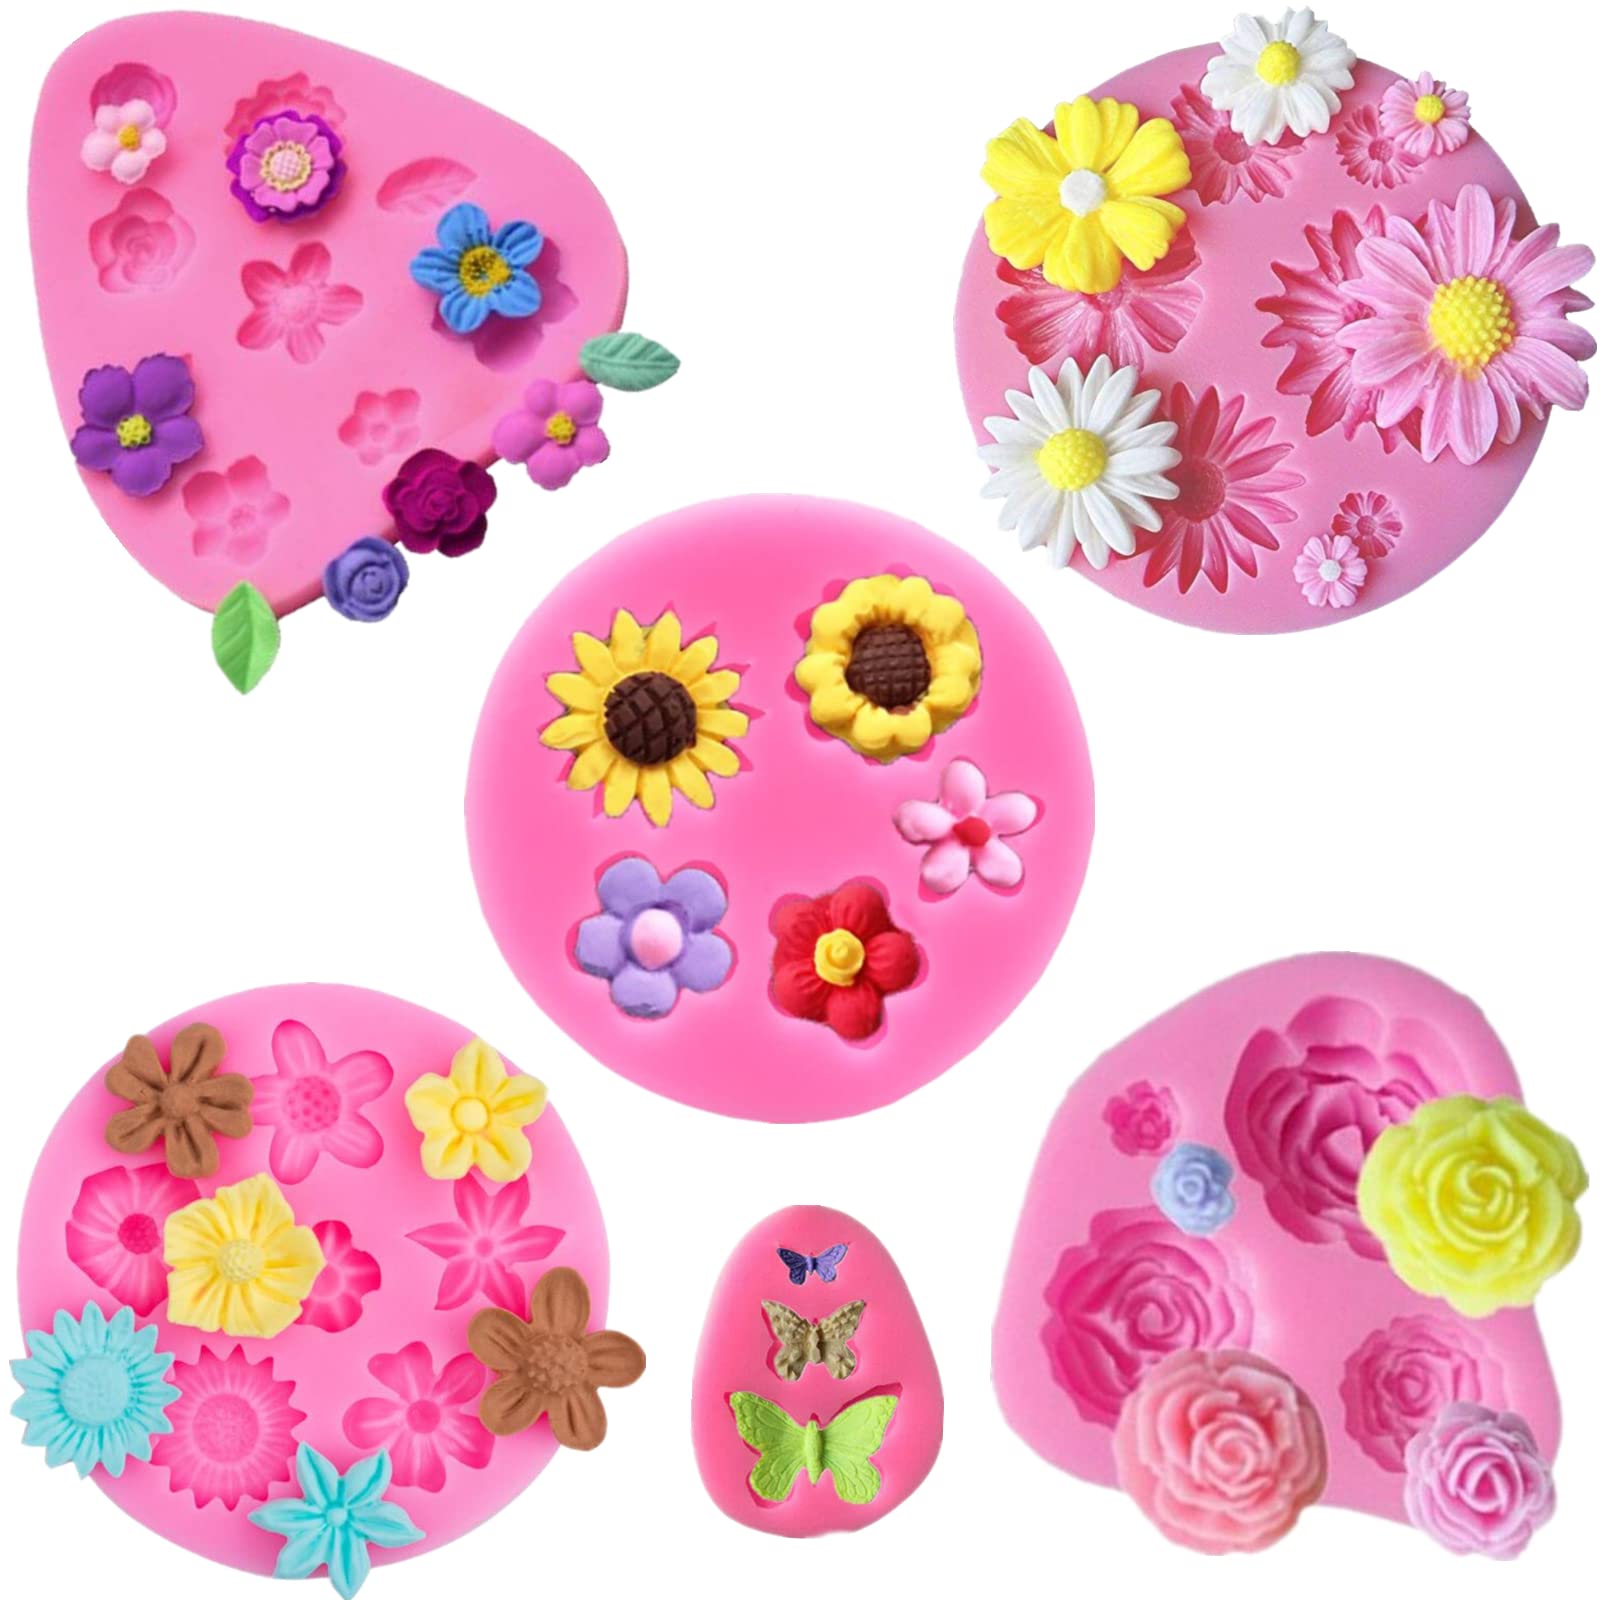 6 Pcs Flower Silicone Mold Set,Rose Daisy Butterfly and Mini Flowers Molds for Candy Chocolate Fondant Polymer Clay Soap Crafting Projects Cake Decoration